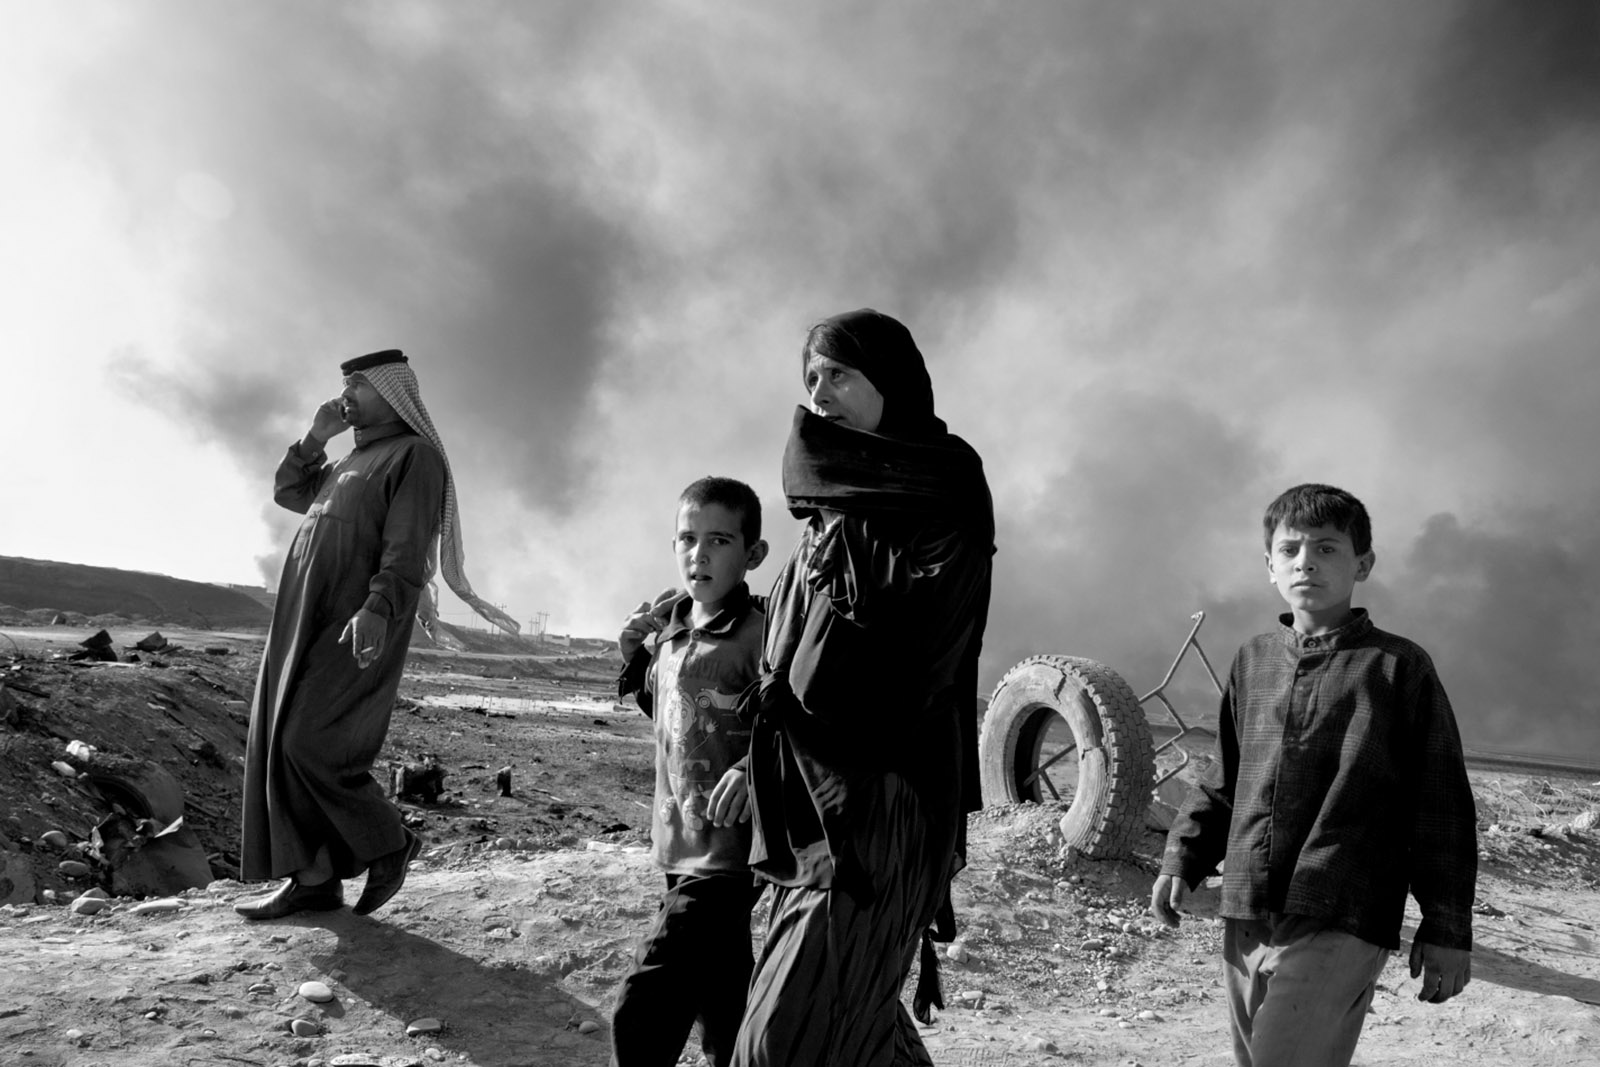 Iraqi civilians fleeing the town of Qayyara, about thirty-five miles south of Mosul, November 2016